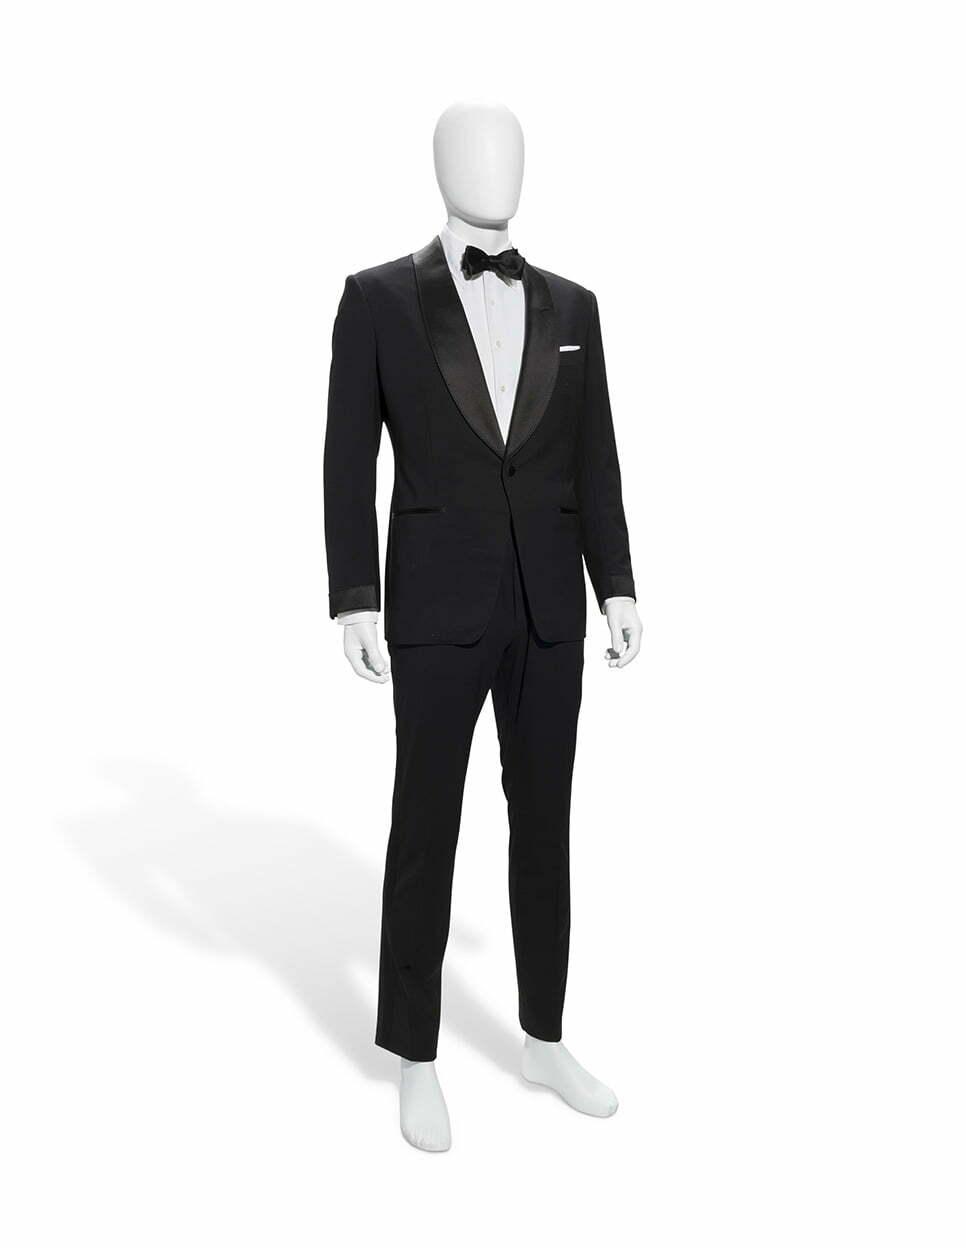 NO TIME TO DIE (2021)  A TOM FORD TWO-PIECE DINNER SUIT WITH CROCKETT & JONES SHOES, WORN BY DANIEL CRAIG AS JAMES BOND 